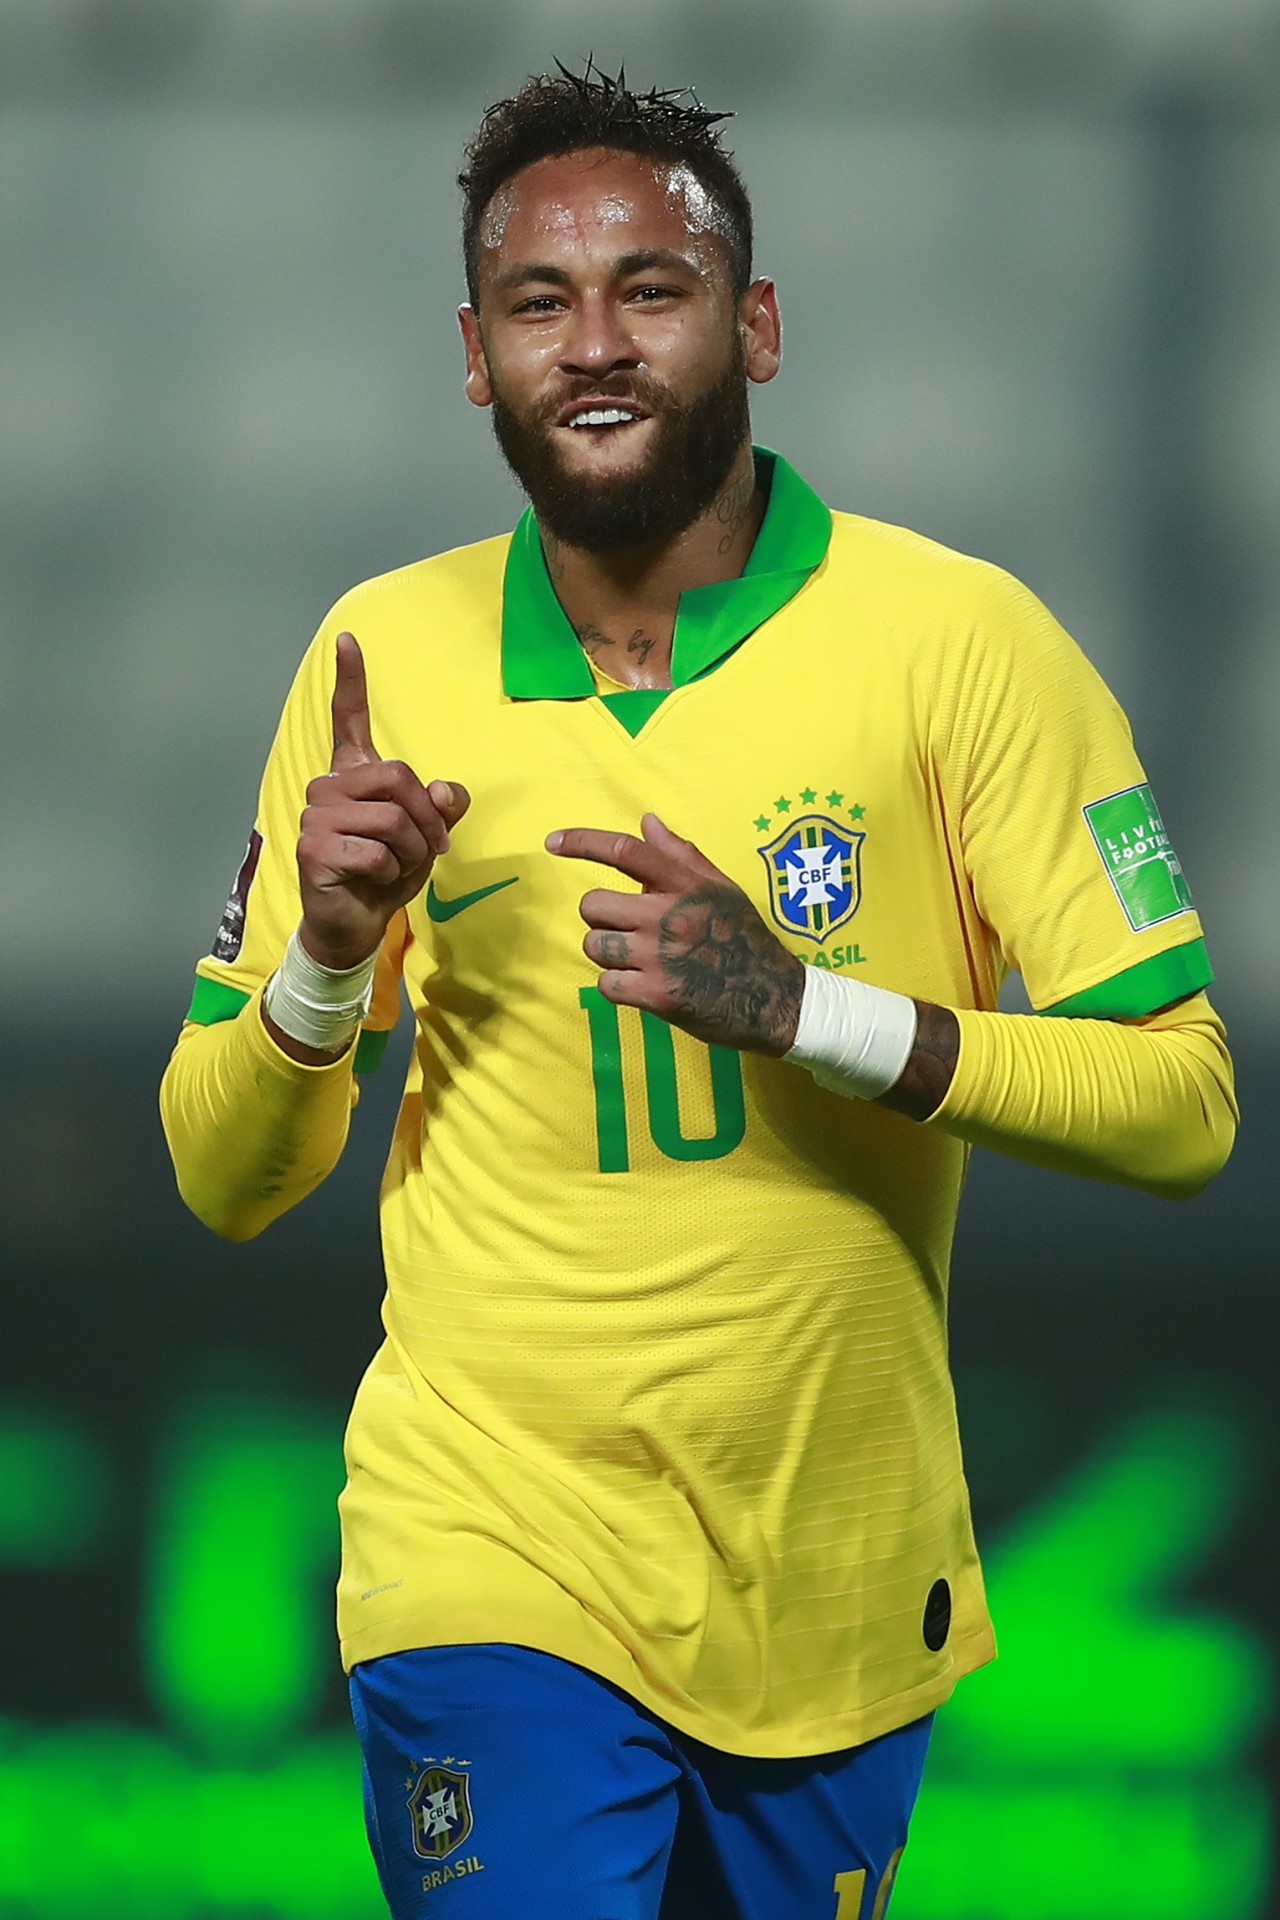 Brazil's Neymar celebrates after scoring a penalty against Peru during their 2022 FIFA World Cup South American qualifier football match at the National Stadium in Lima, on October 13, 2020, amid the COVID-19 novel coronavirus pandemic. (Photo by Daniel APUY / POOL / AFP) - AFP